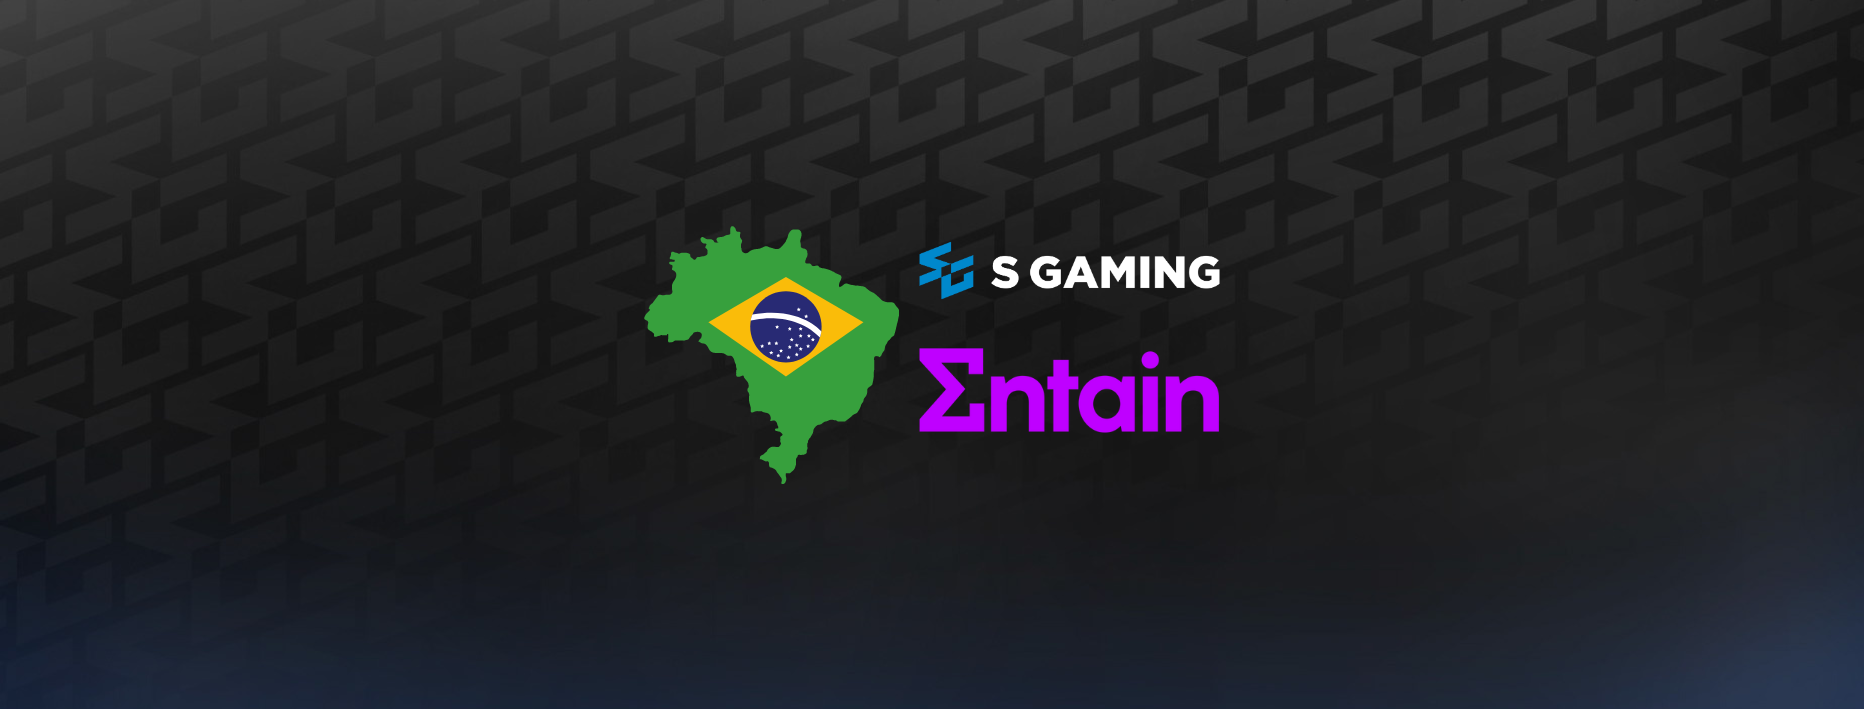 S Gaming Expands Presence into Brazil Market with Entain Partnership